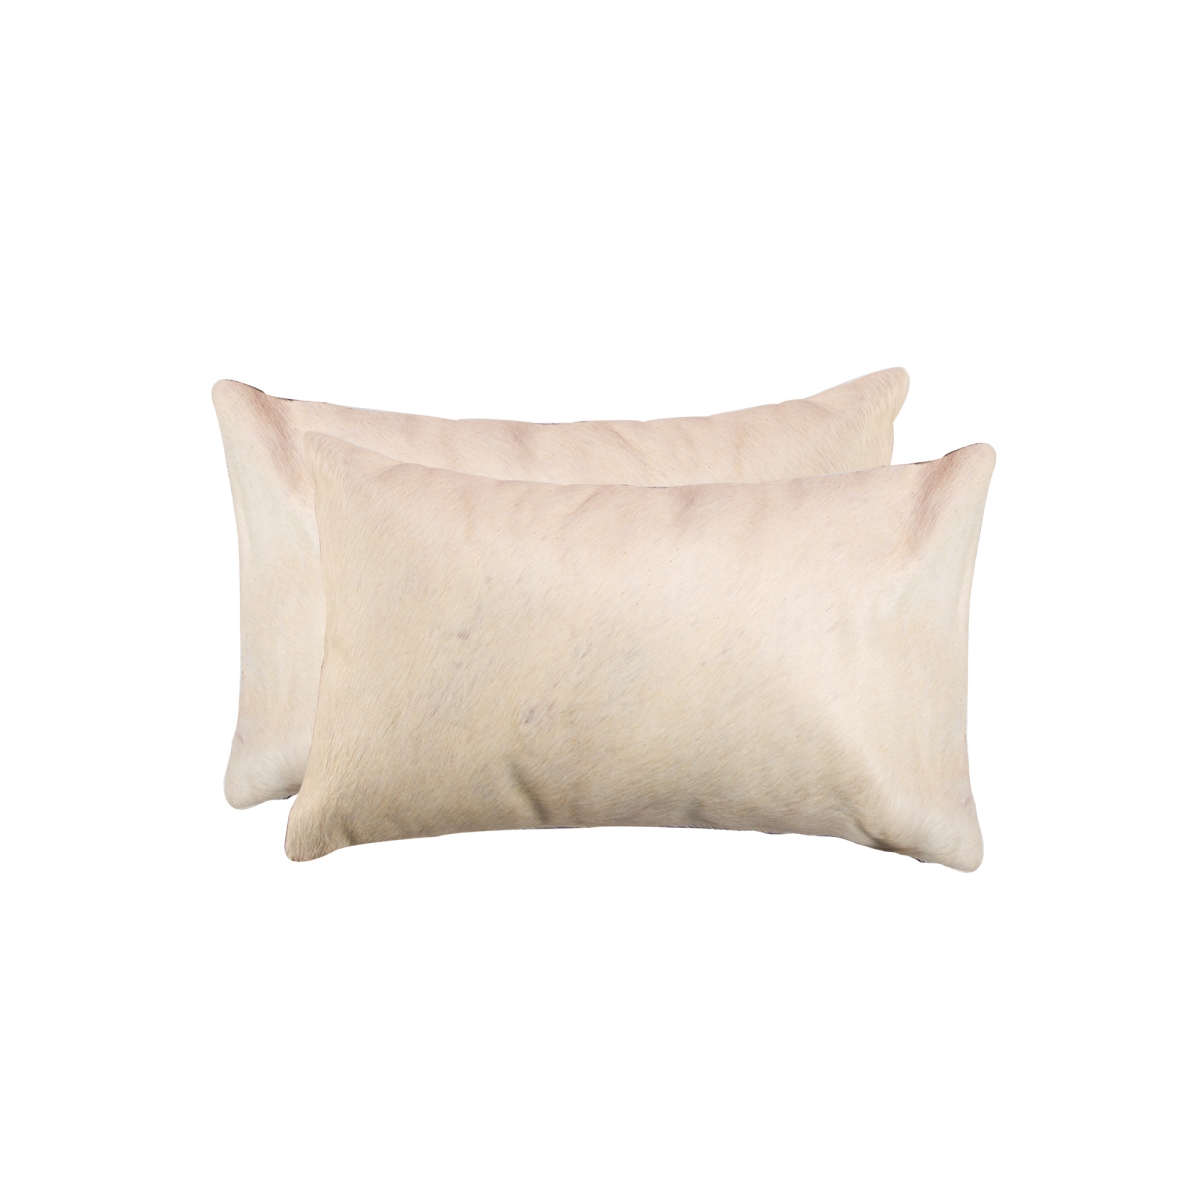 Picture of HomeRoots 317105 12 x 20 in. Cowhide Pillow, Natural - Pack of 2